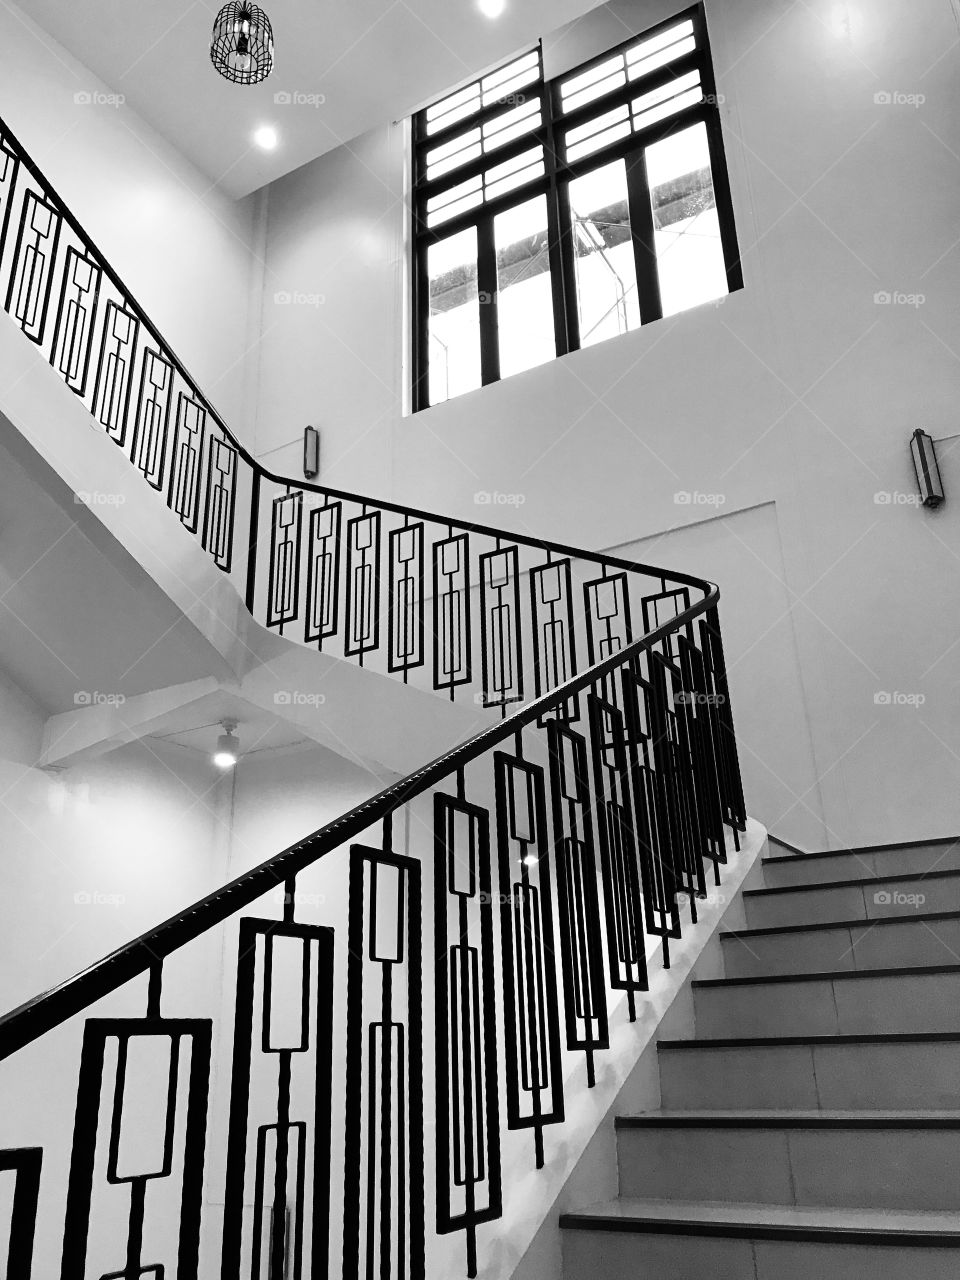 Step by step to stairs black and white window 